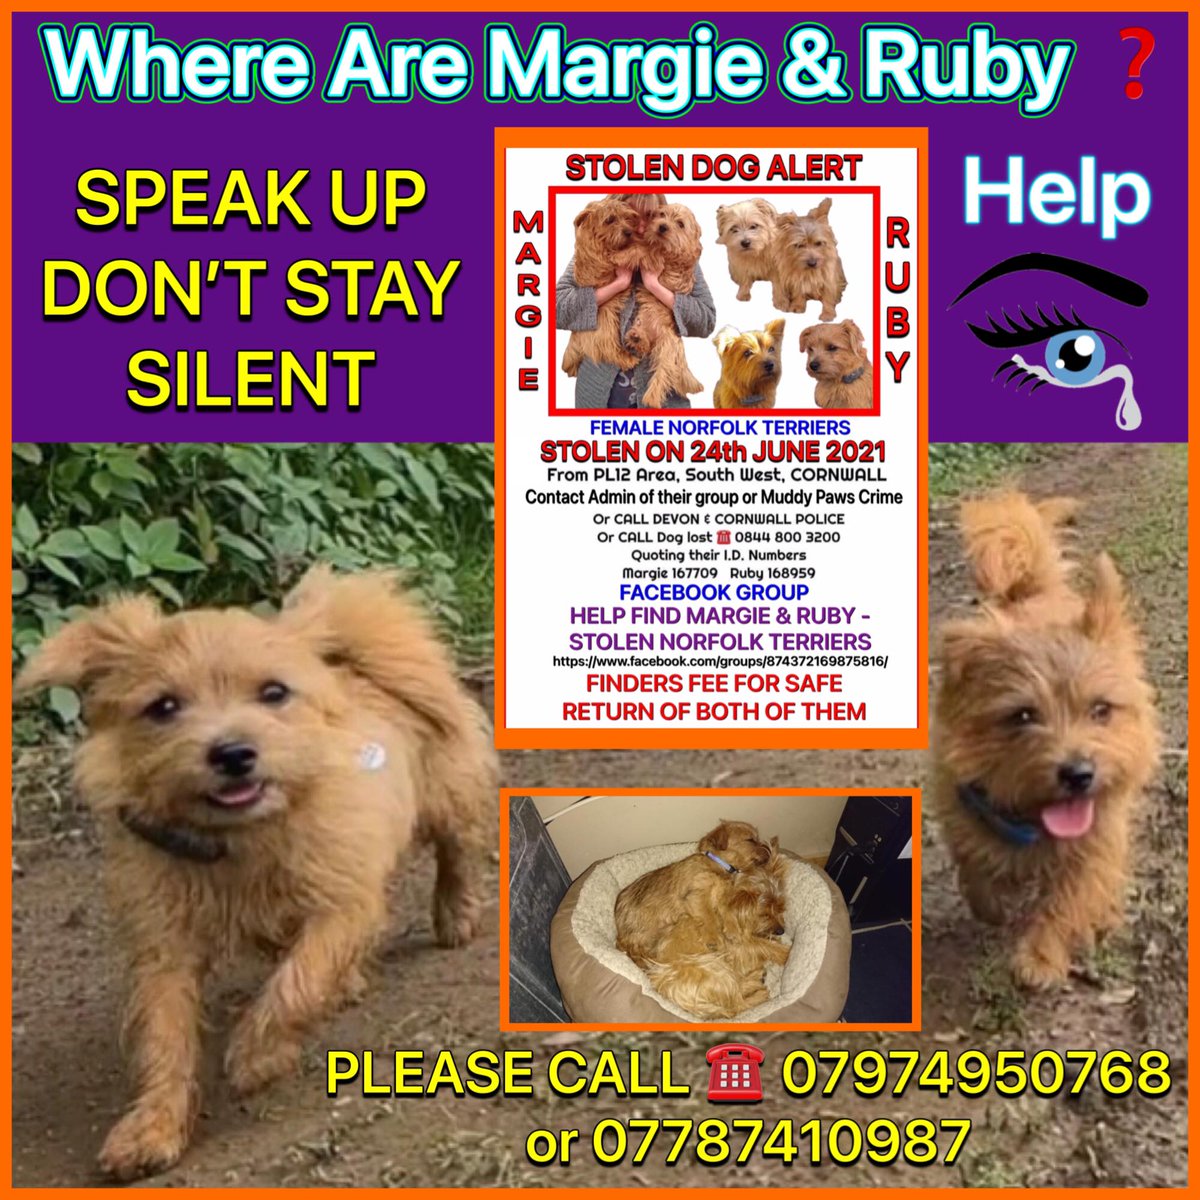 MISSING  💥  DOGS
#stolendoghour 
#missingdog x2
#StolenMargieandRuby 
#FindMargieRuby 
@FindMargieruby
Please report any sightings 
         RT   RT   RT